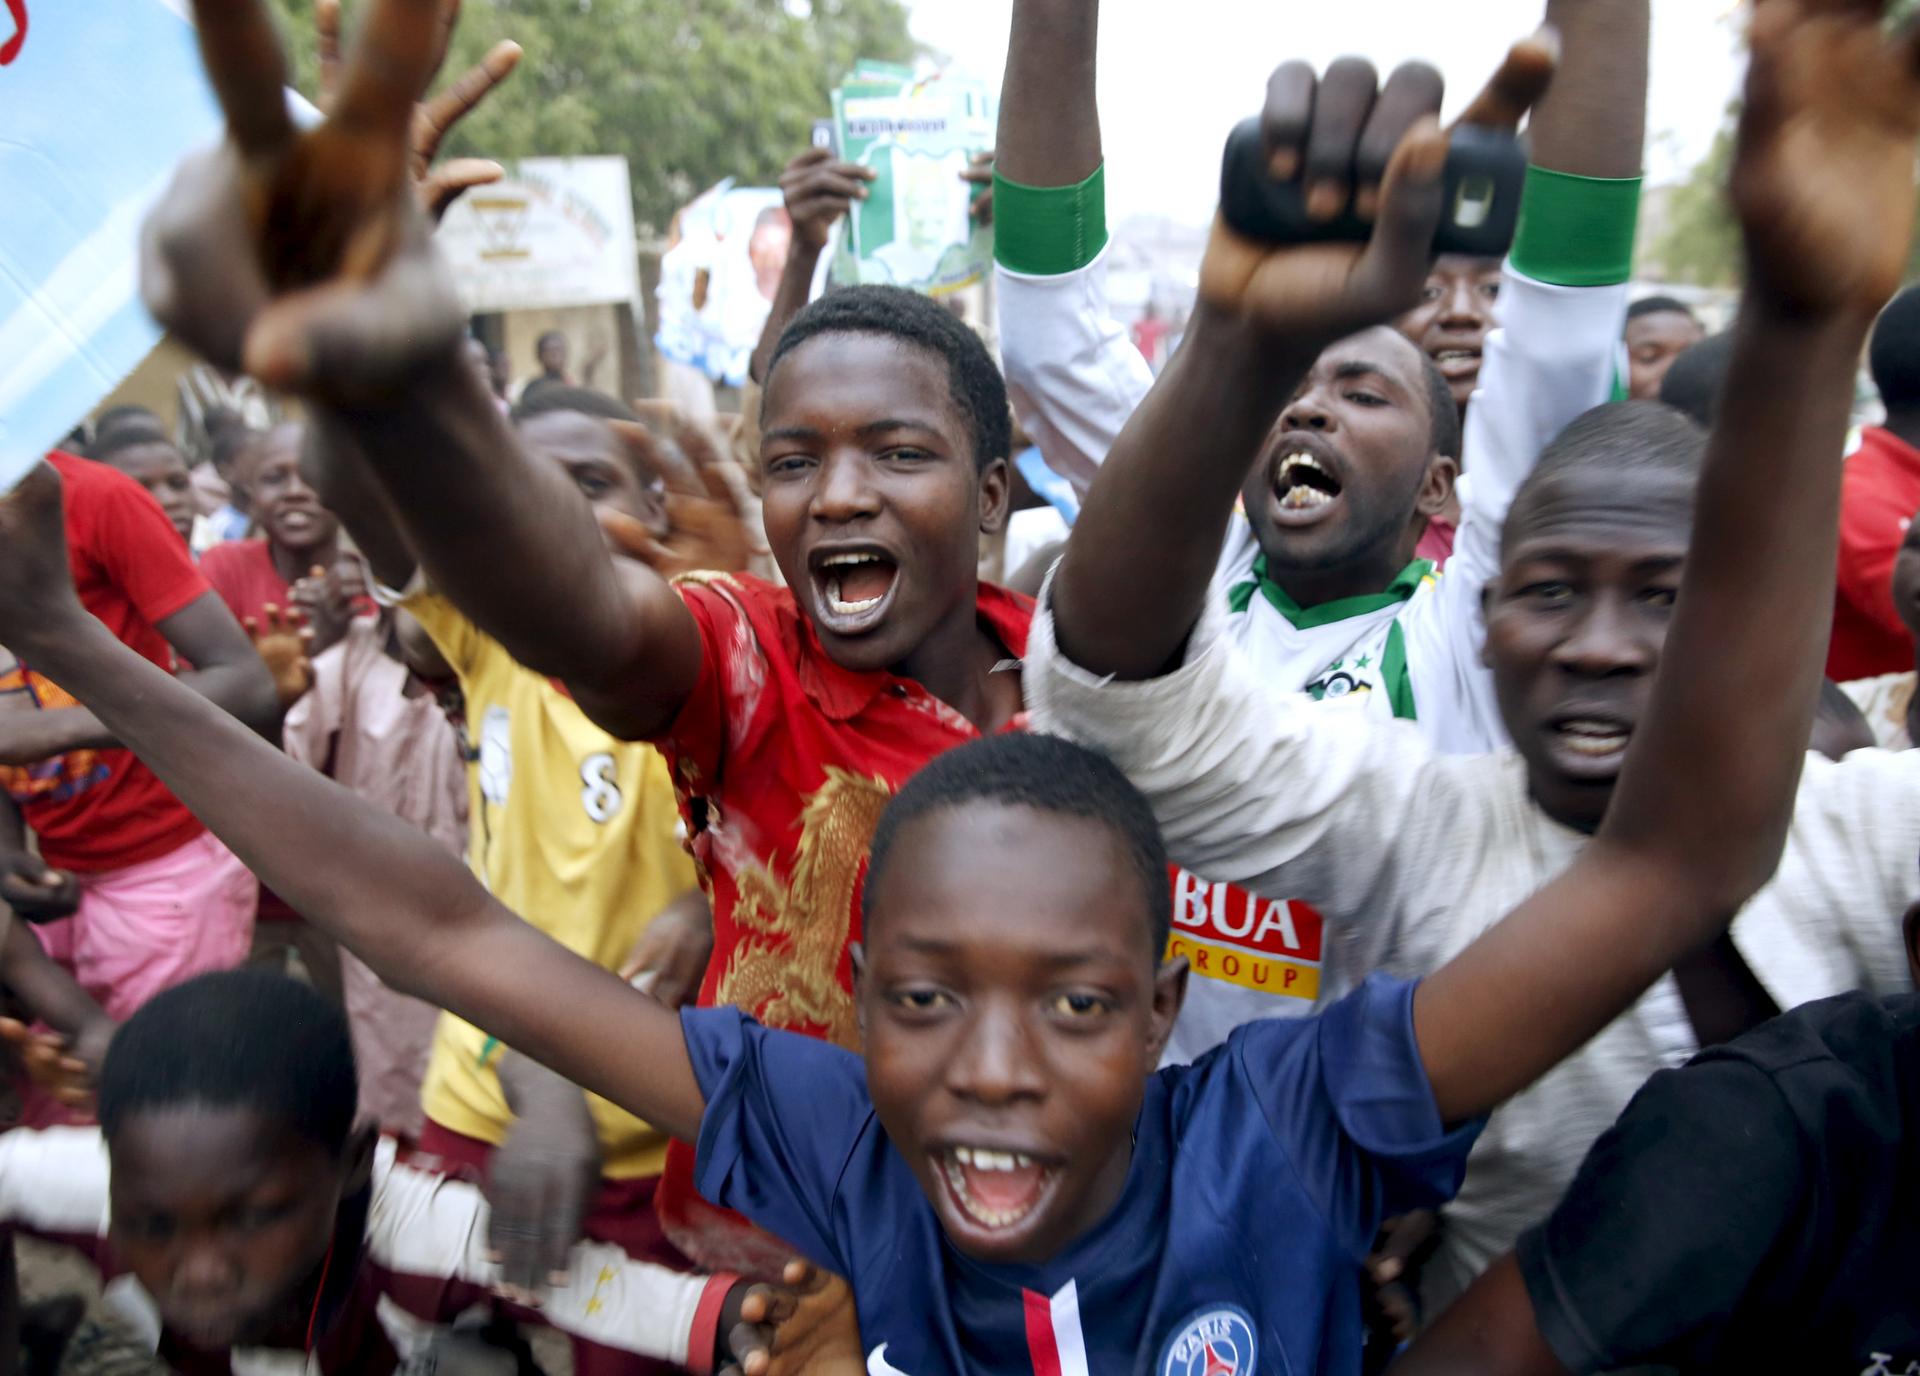 Supporters of Nigerian presidential candidate Muhammadu Buhari celebrate his election victory on March 31, 2015. Buhari is the first Nigerian to peacefully oust a sitting president under the country's democratic system.